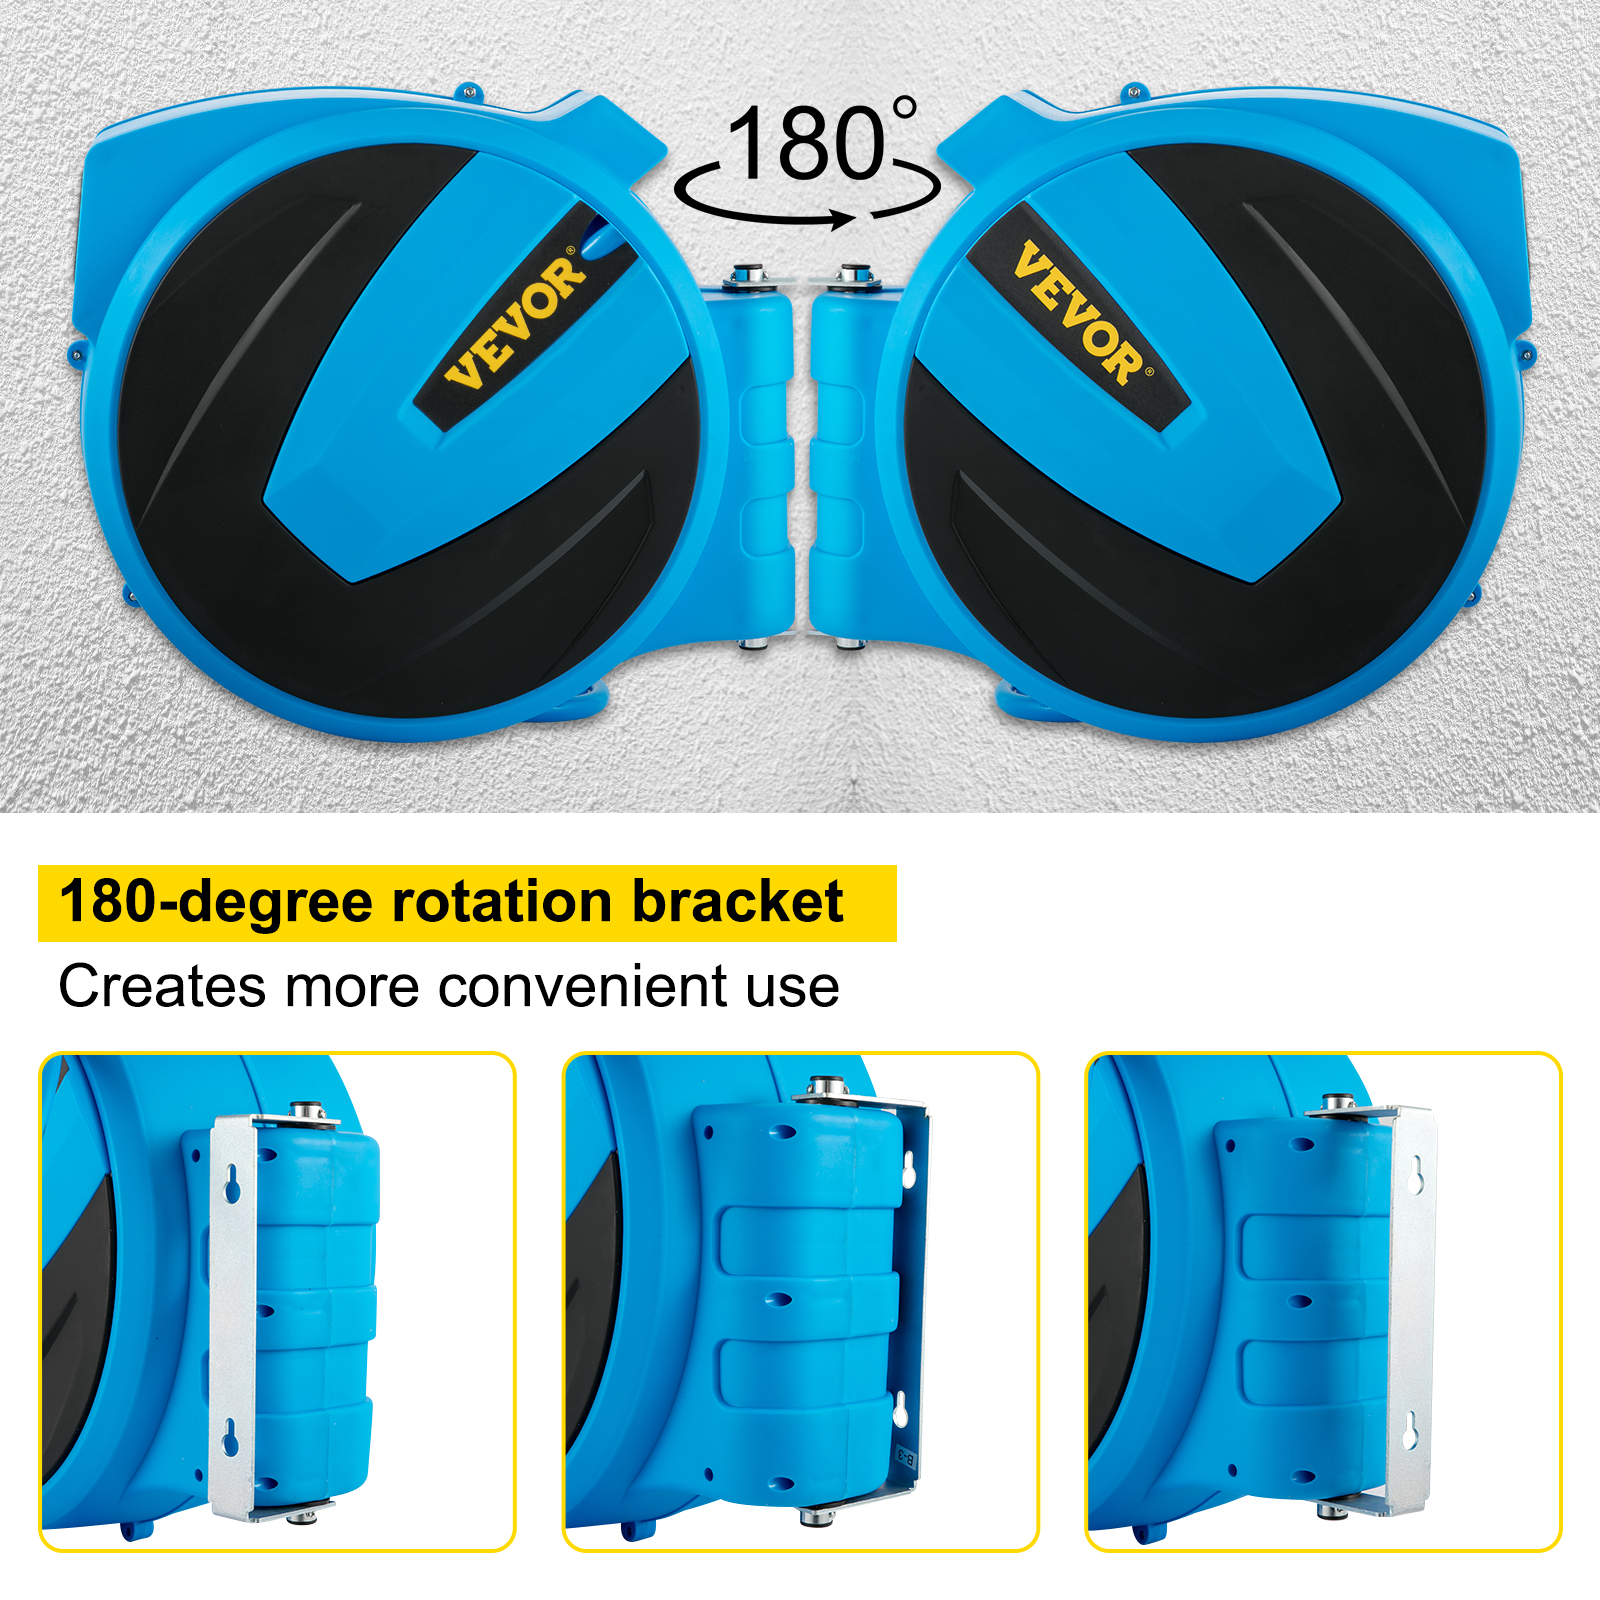 VEVOR Retractable Hose Reel, 1/2 inch x 100 ft, Any Length Lock & Automatic  Rewind Water Hose, Wall Mounted Garden Hose Reel w/ 180° Swivel Bracket and  8 Pattern Hose Nozzle, Blue